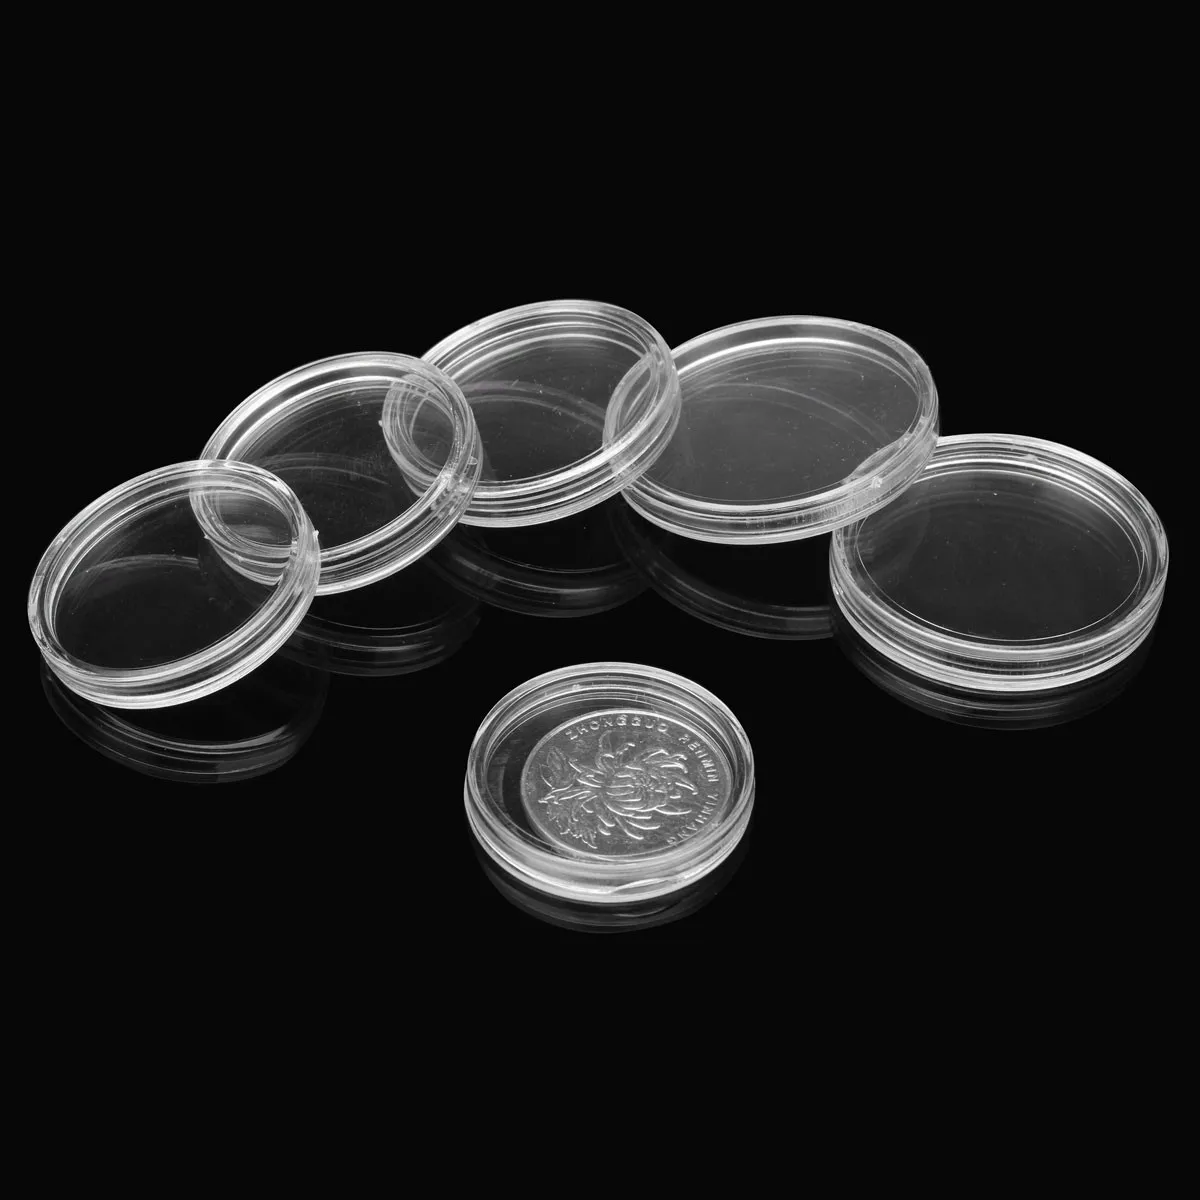 25 Coin Capsules /& 25 Coin Stands for NICKEL Direct Fit Airtight 21mm Holders